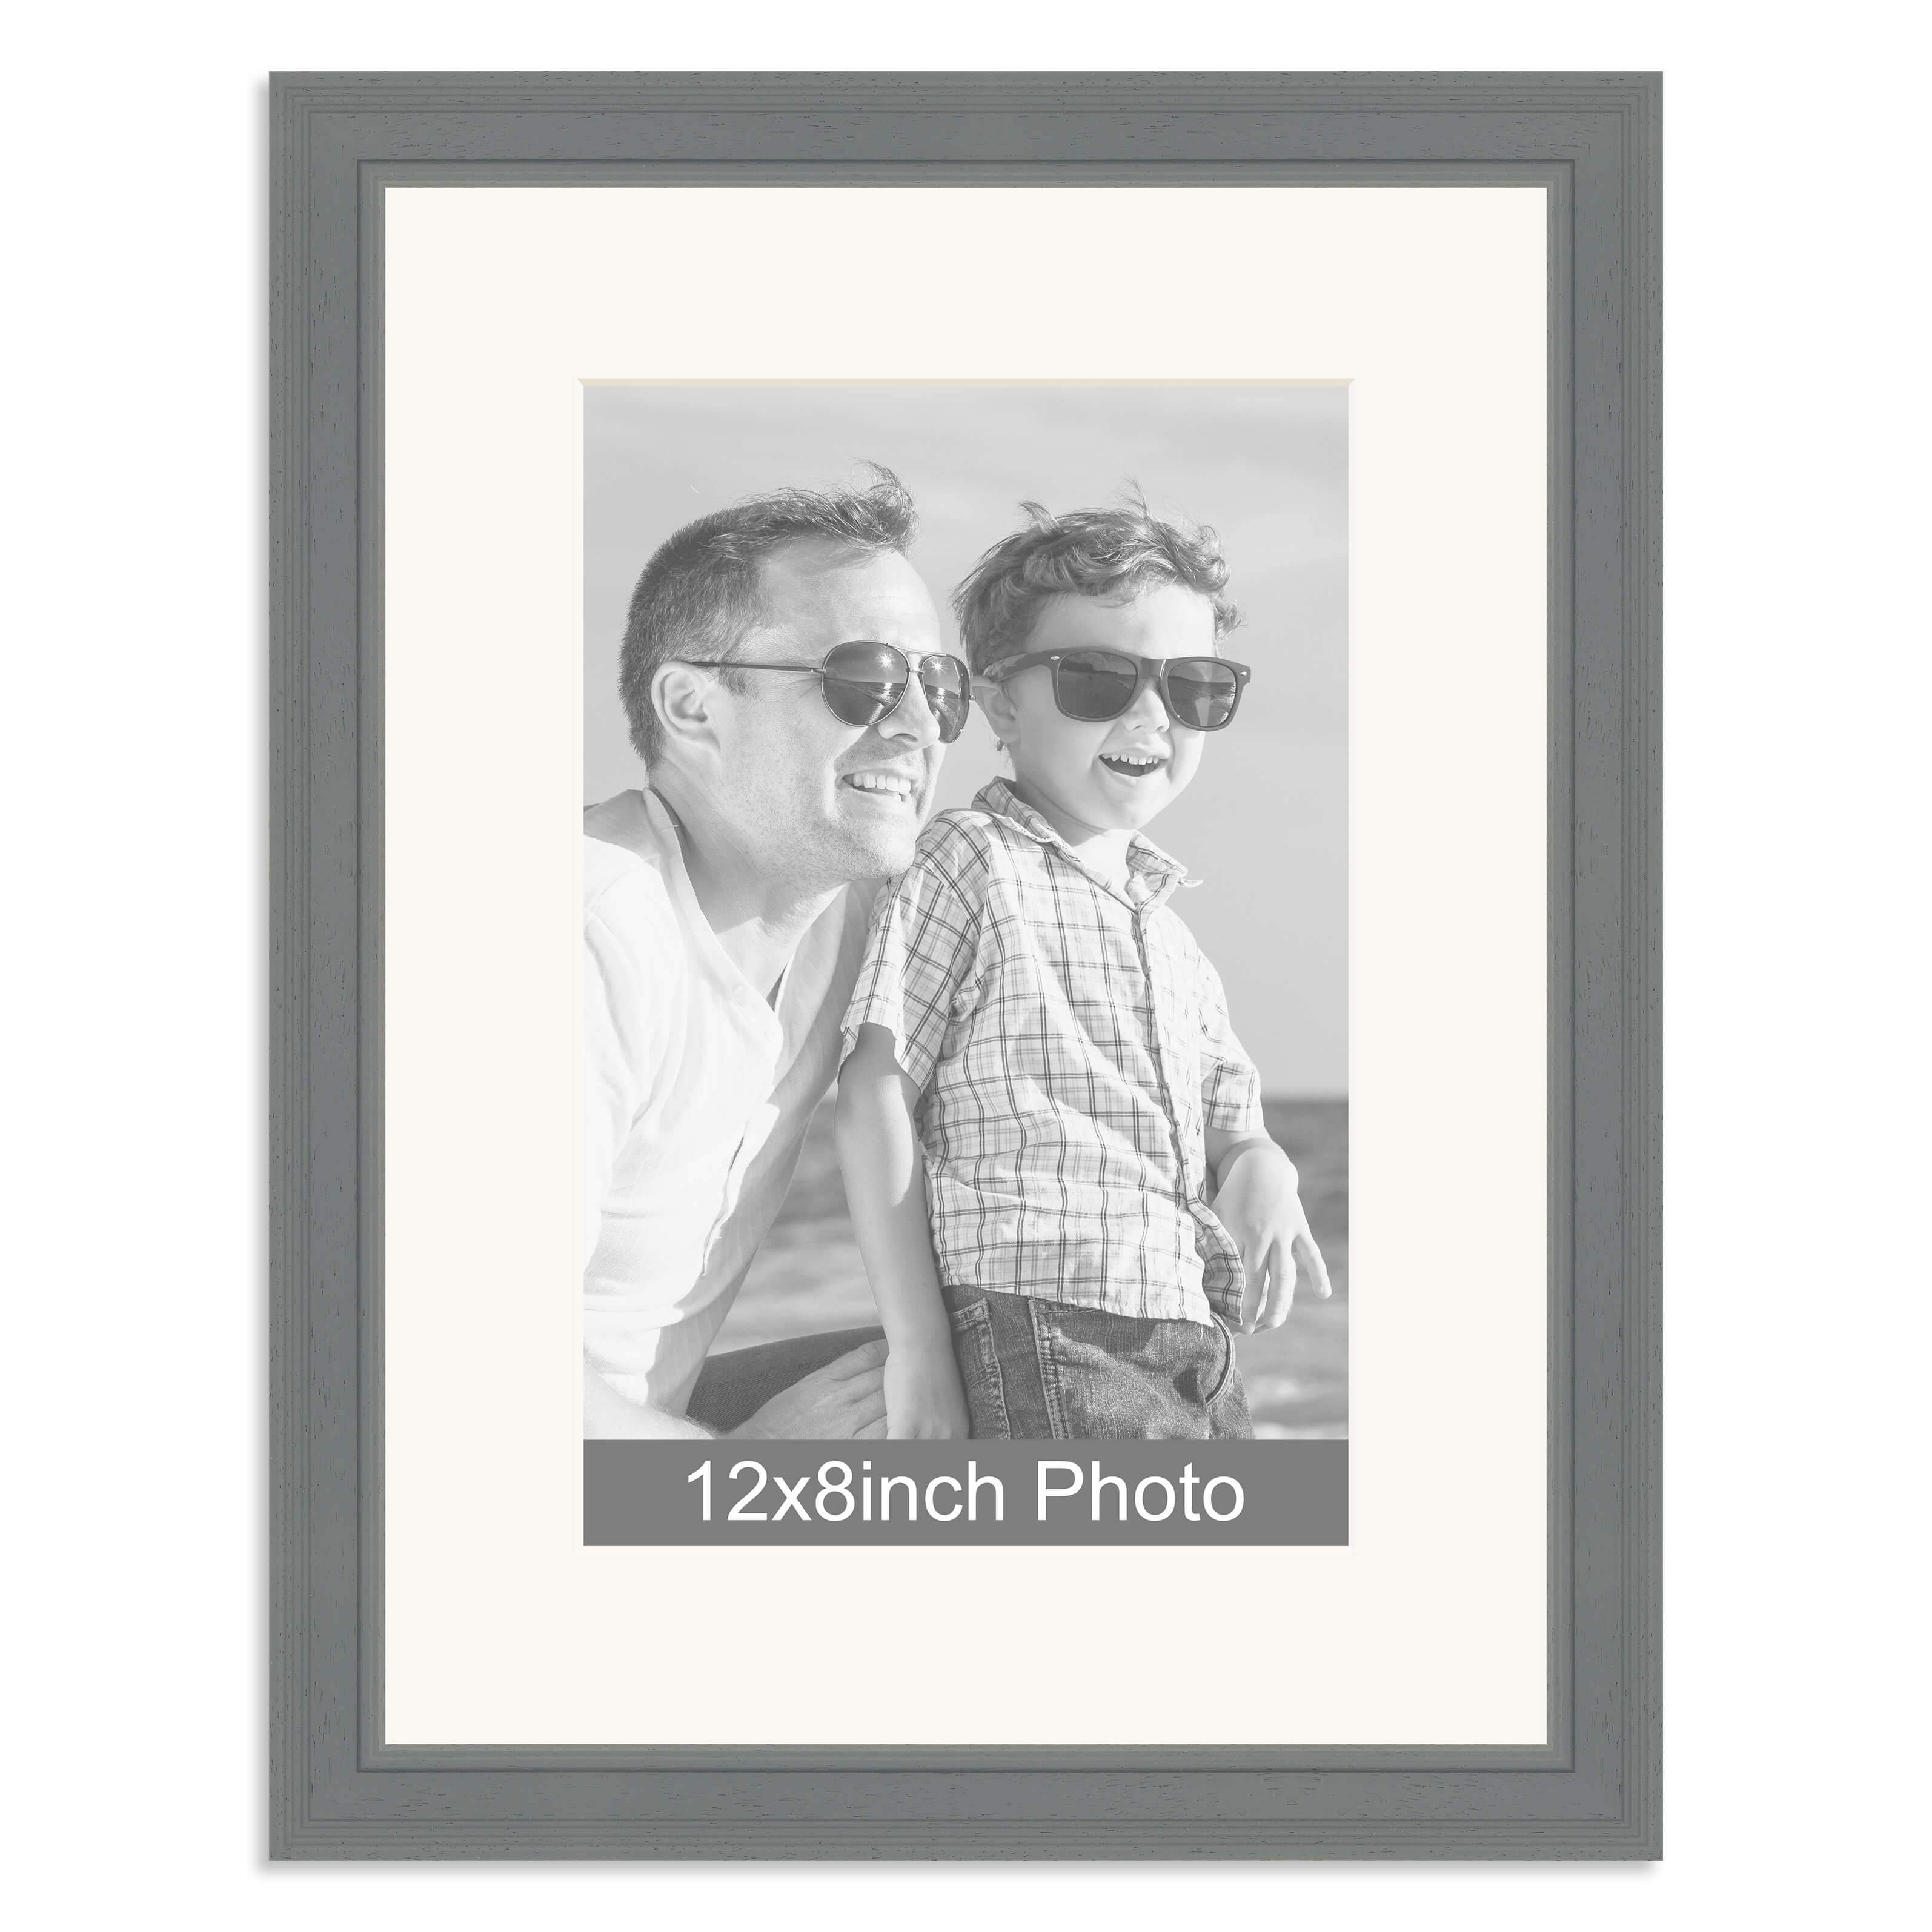 Grey Wooden Photo Frame for a 12×8/8x12in Photo